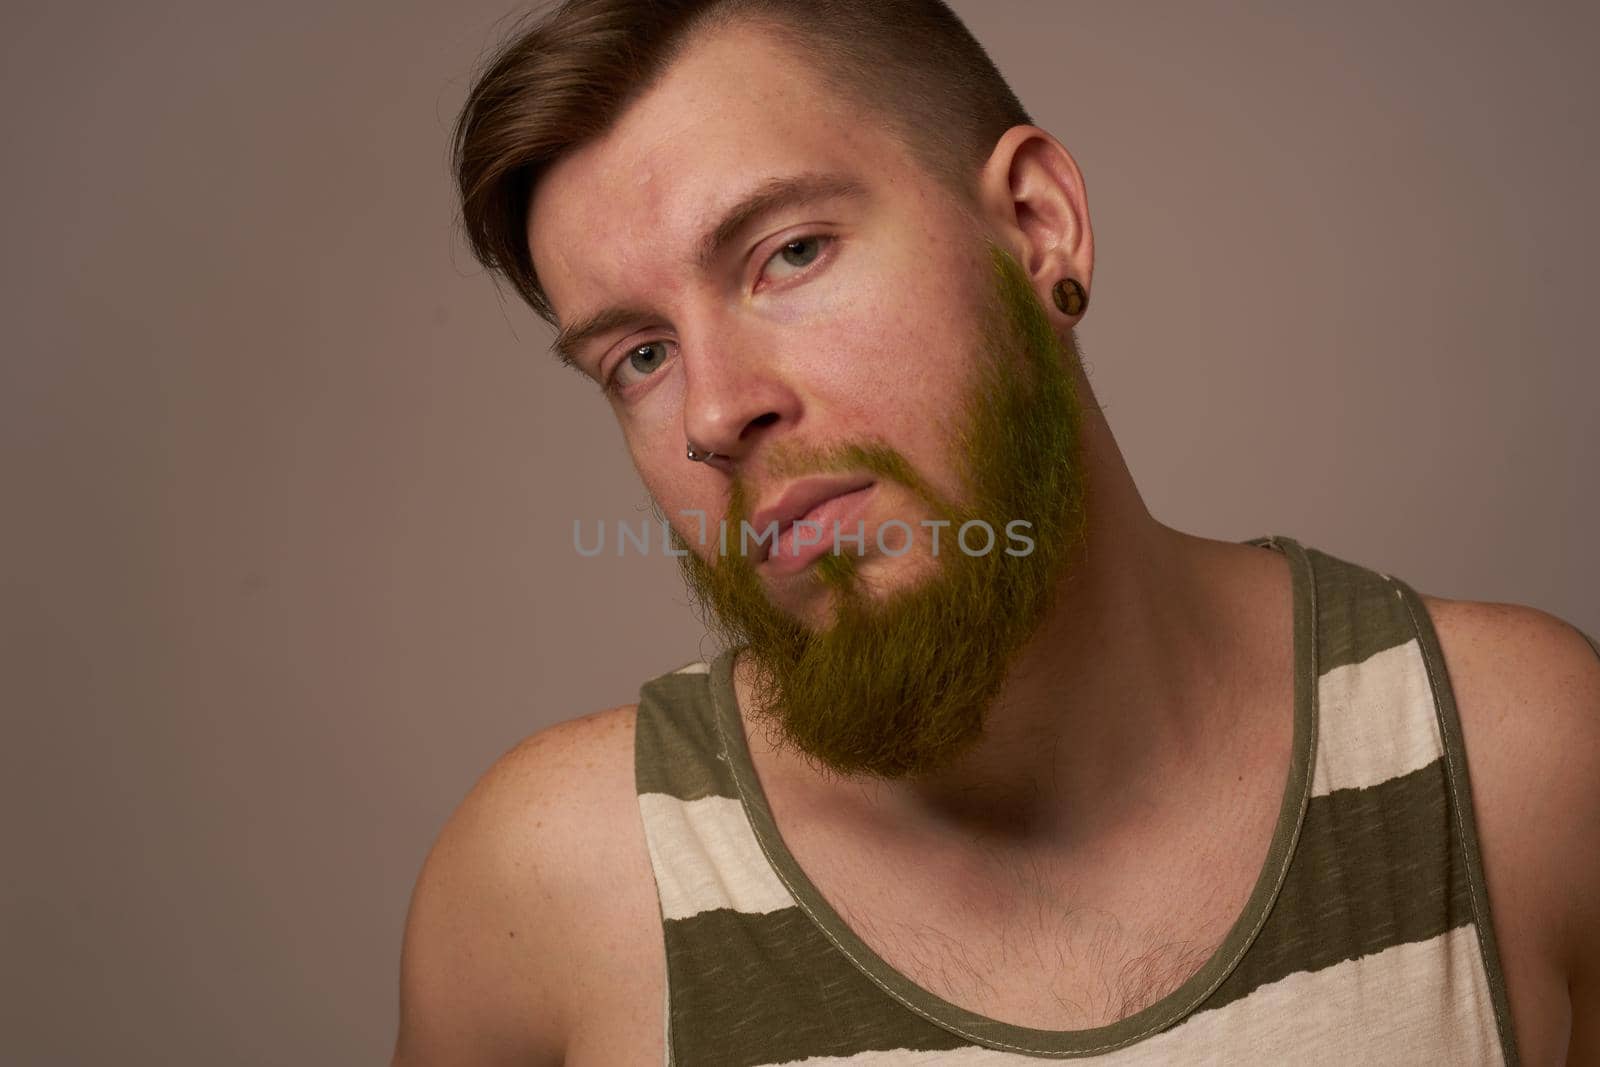 national bearded man in a striped jersey hipster tattoos on his arms. High quality photo